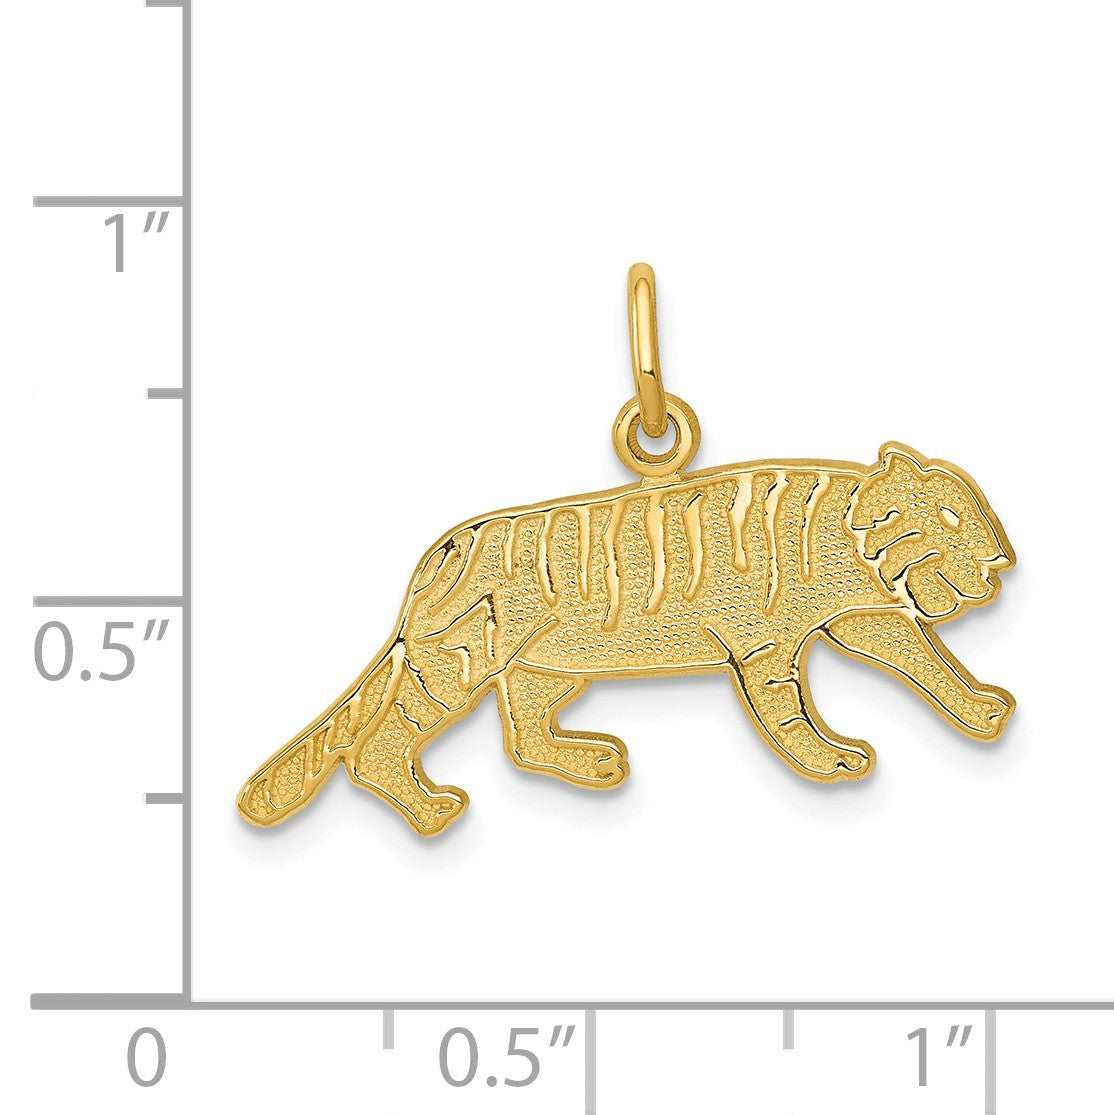 Alternate view of the 14k Yellow Gold Flat Textured Tiger Charm or Pendant, 25mm (1 Inch) by The Black Bow Jewelry Co.